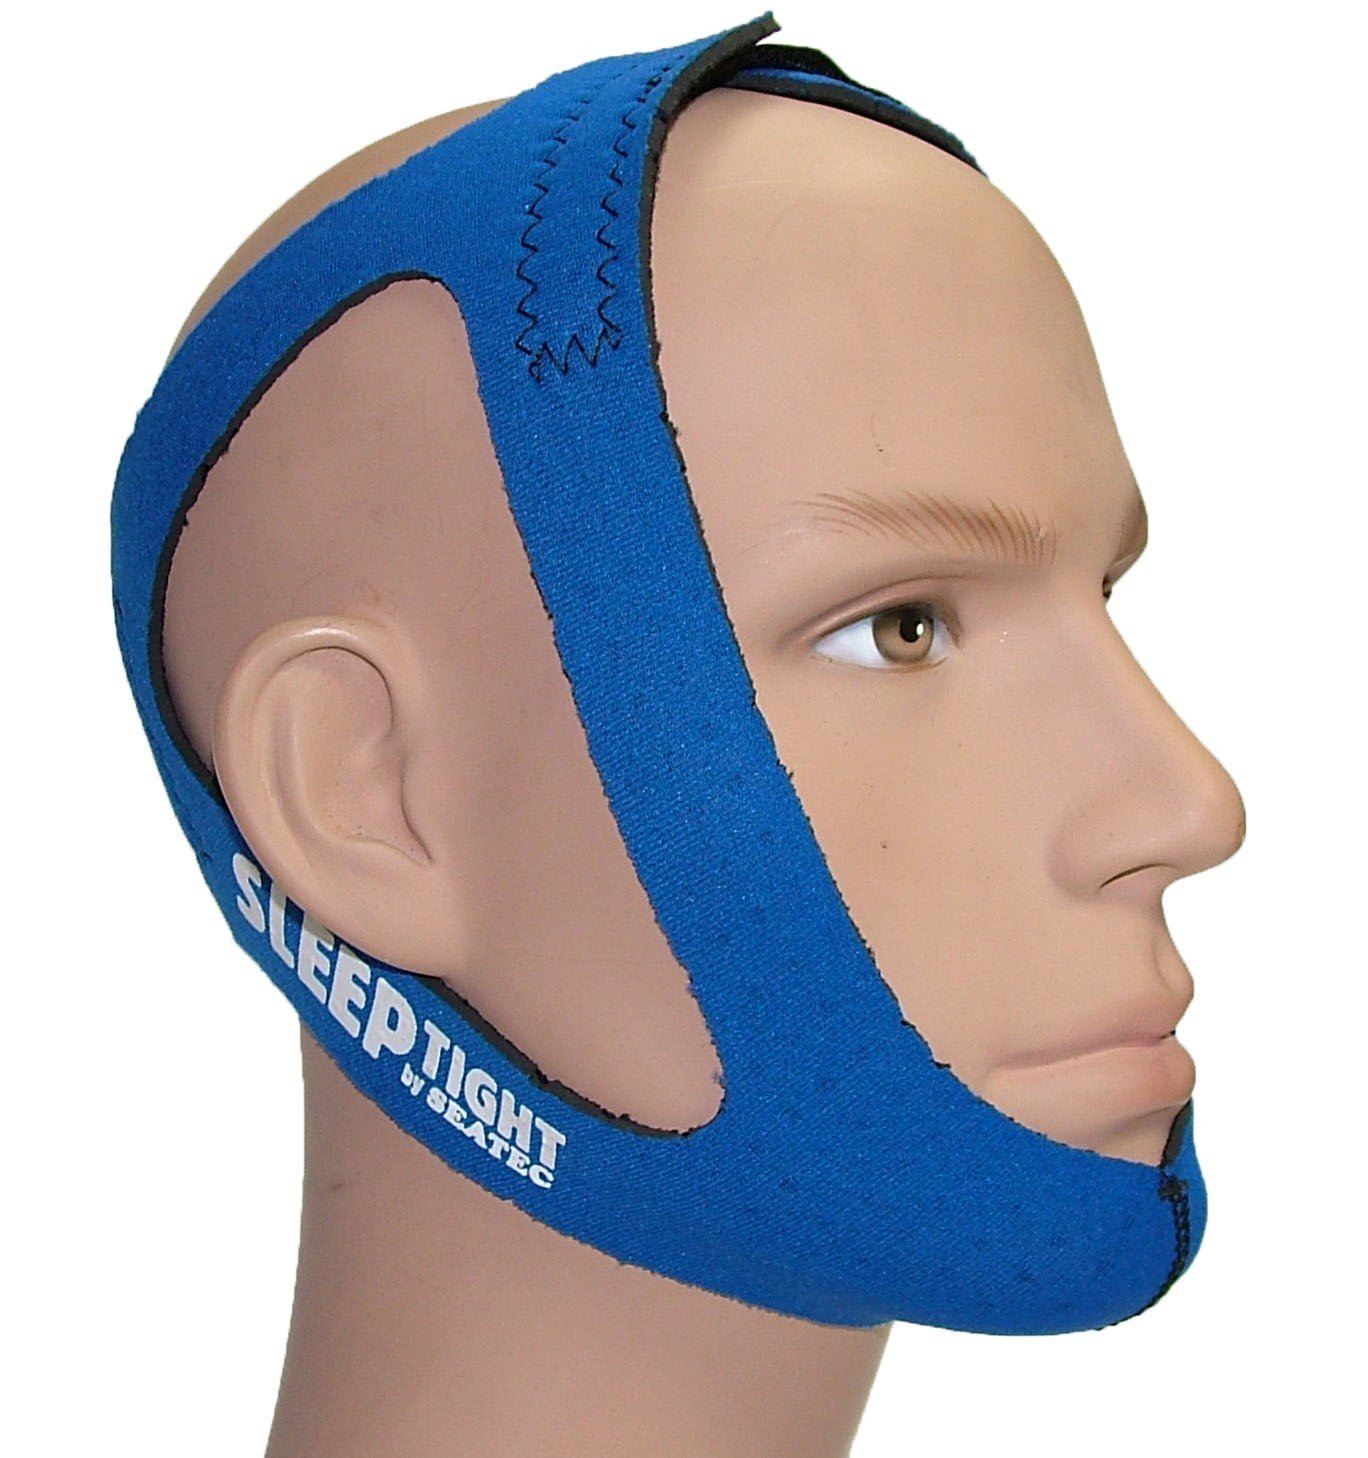 Seatec SleepTight Chinstrap Accessories Philips 